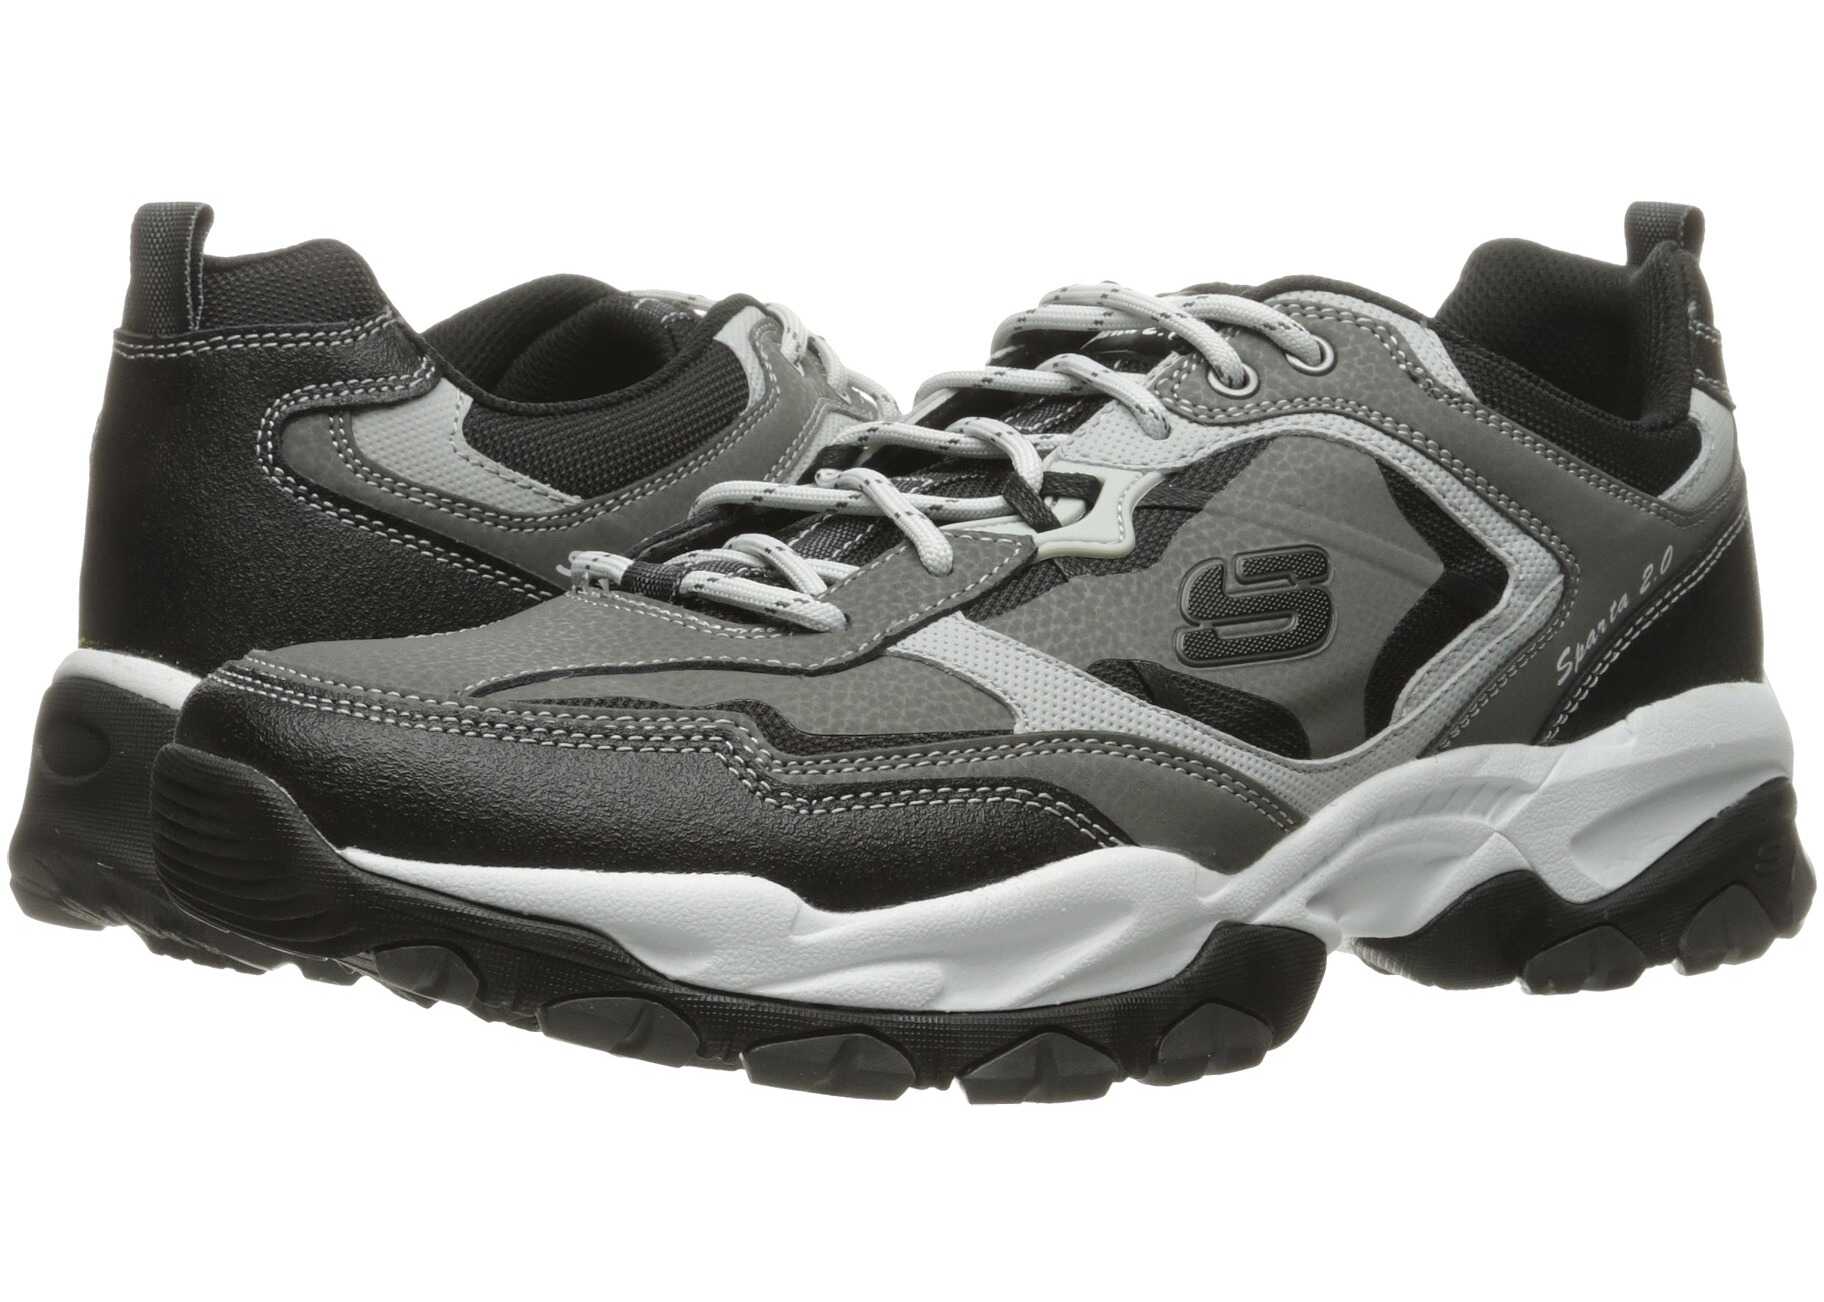 SKECHERS Sparta 2.0 Gray/Charcoal